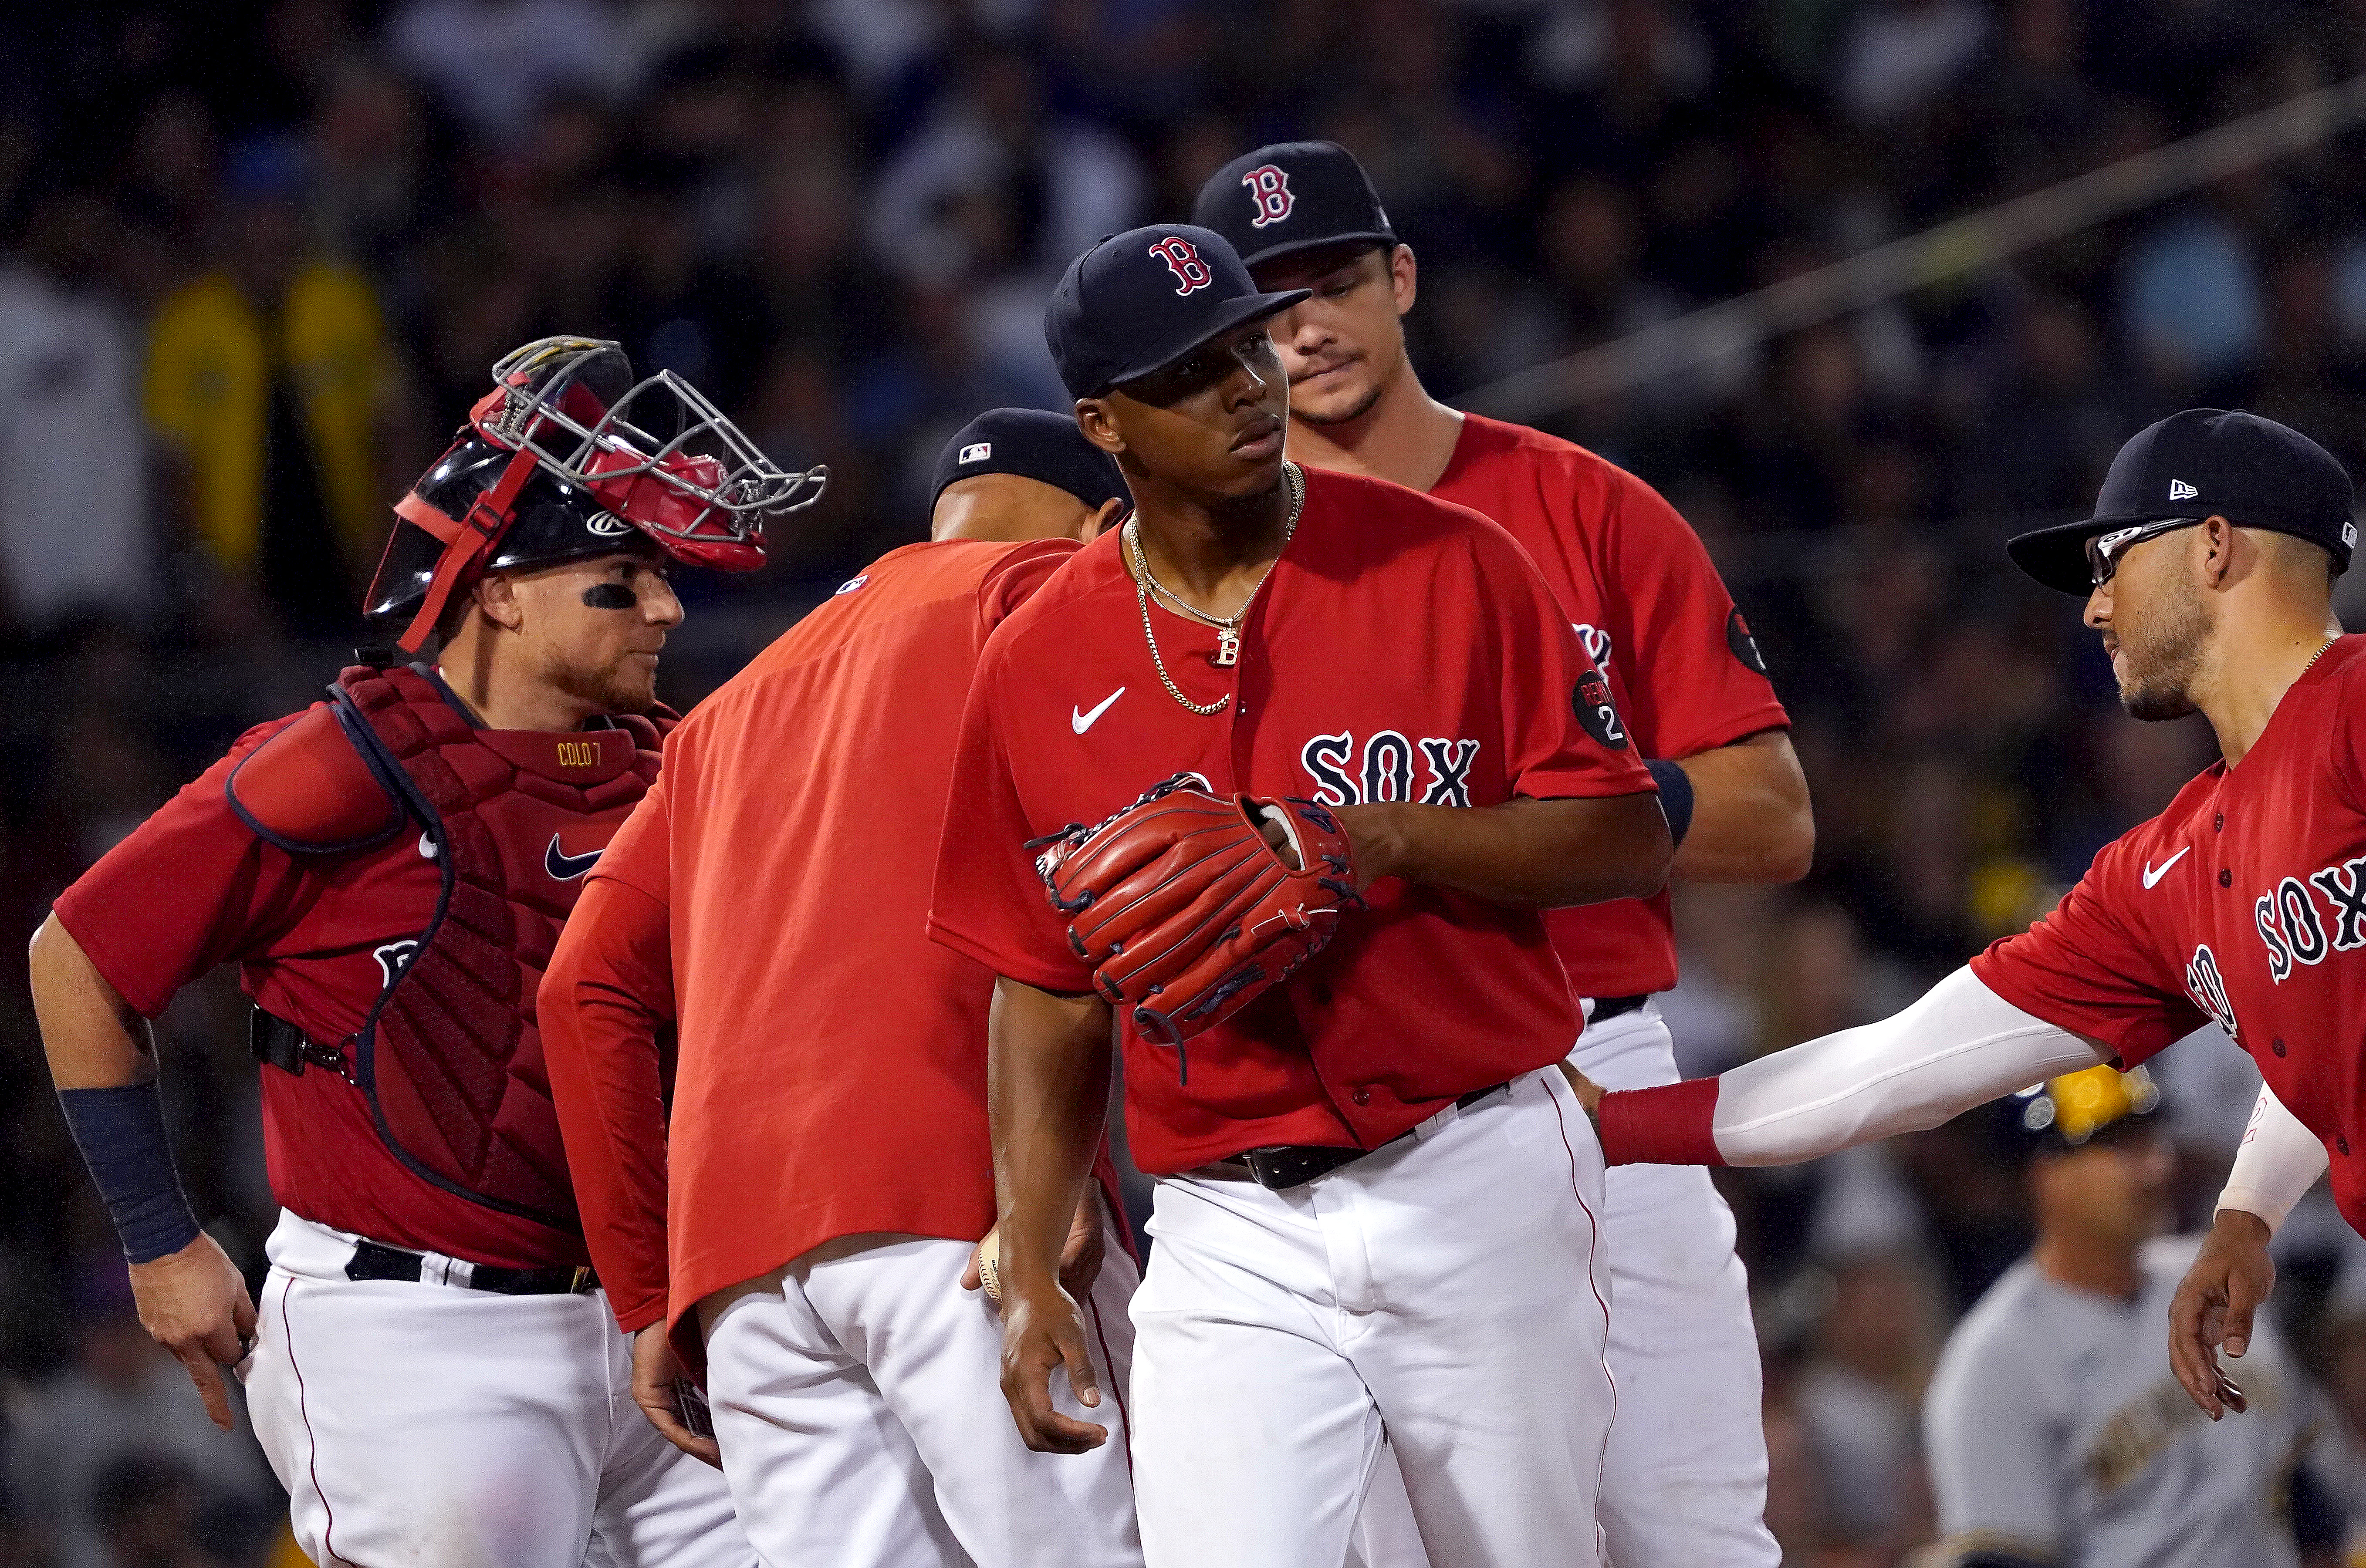 Beyond Rafael Devers, the Red Sox are all question marks, and